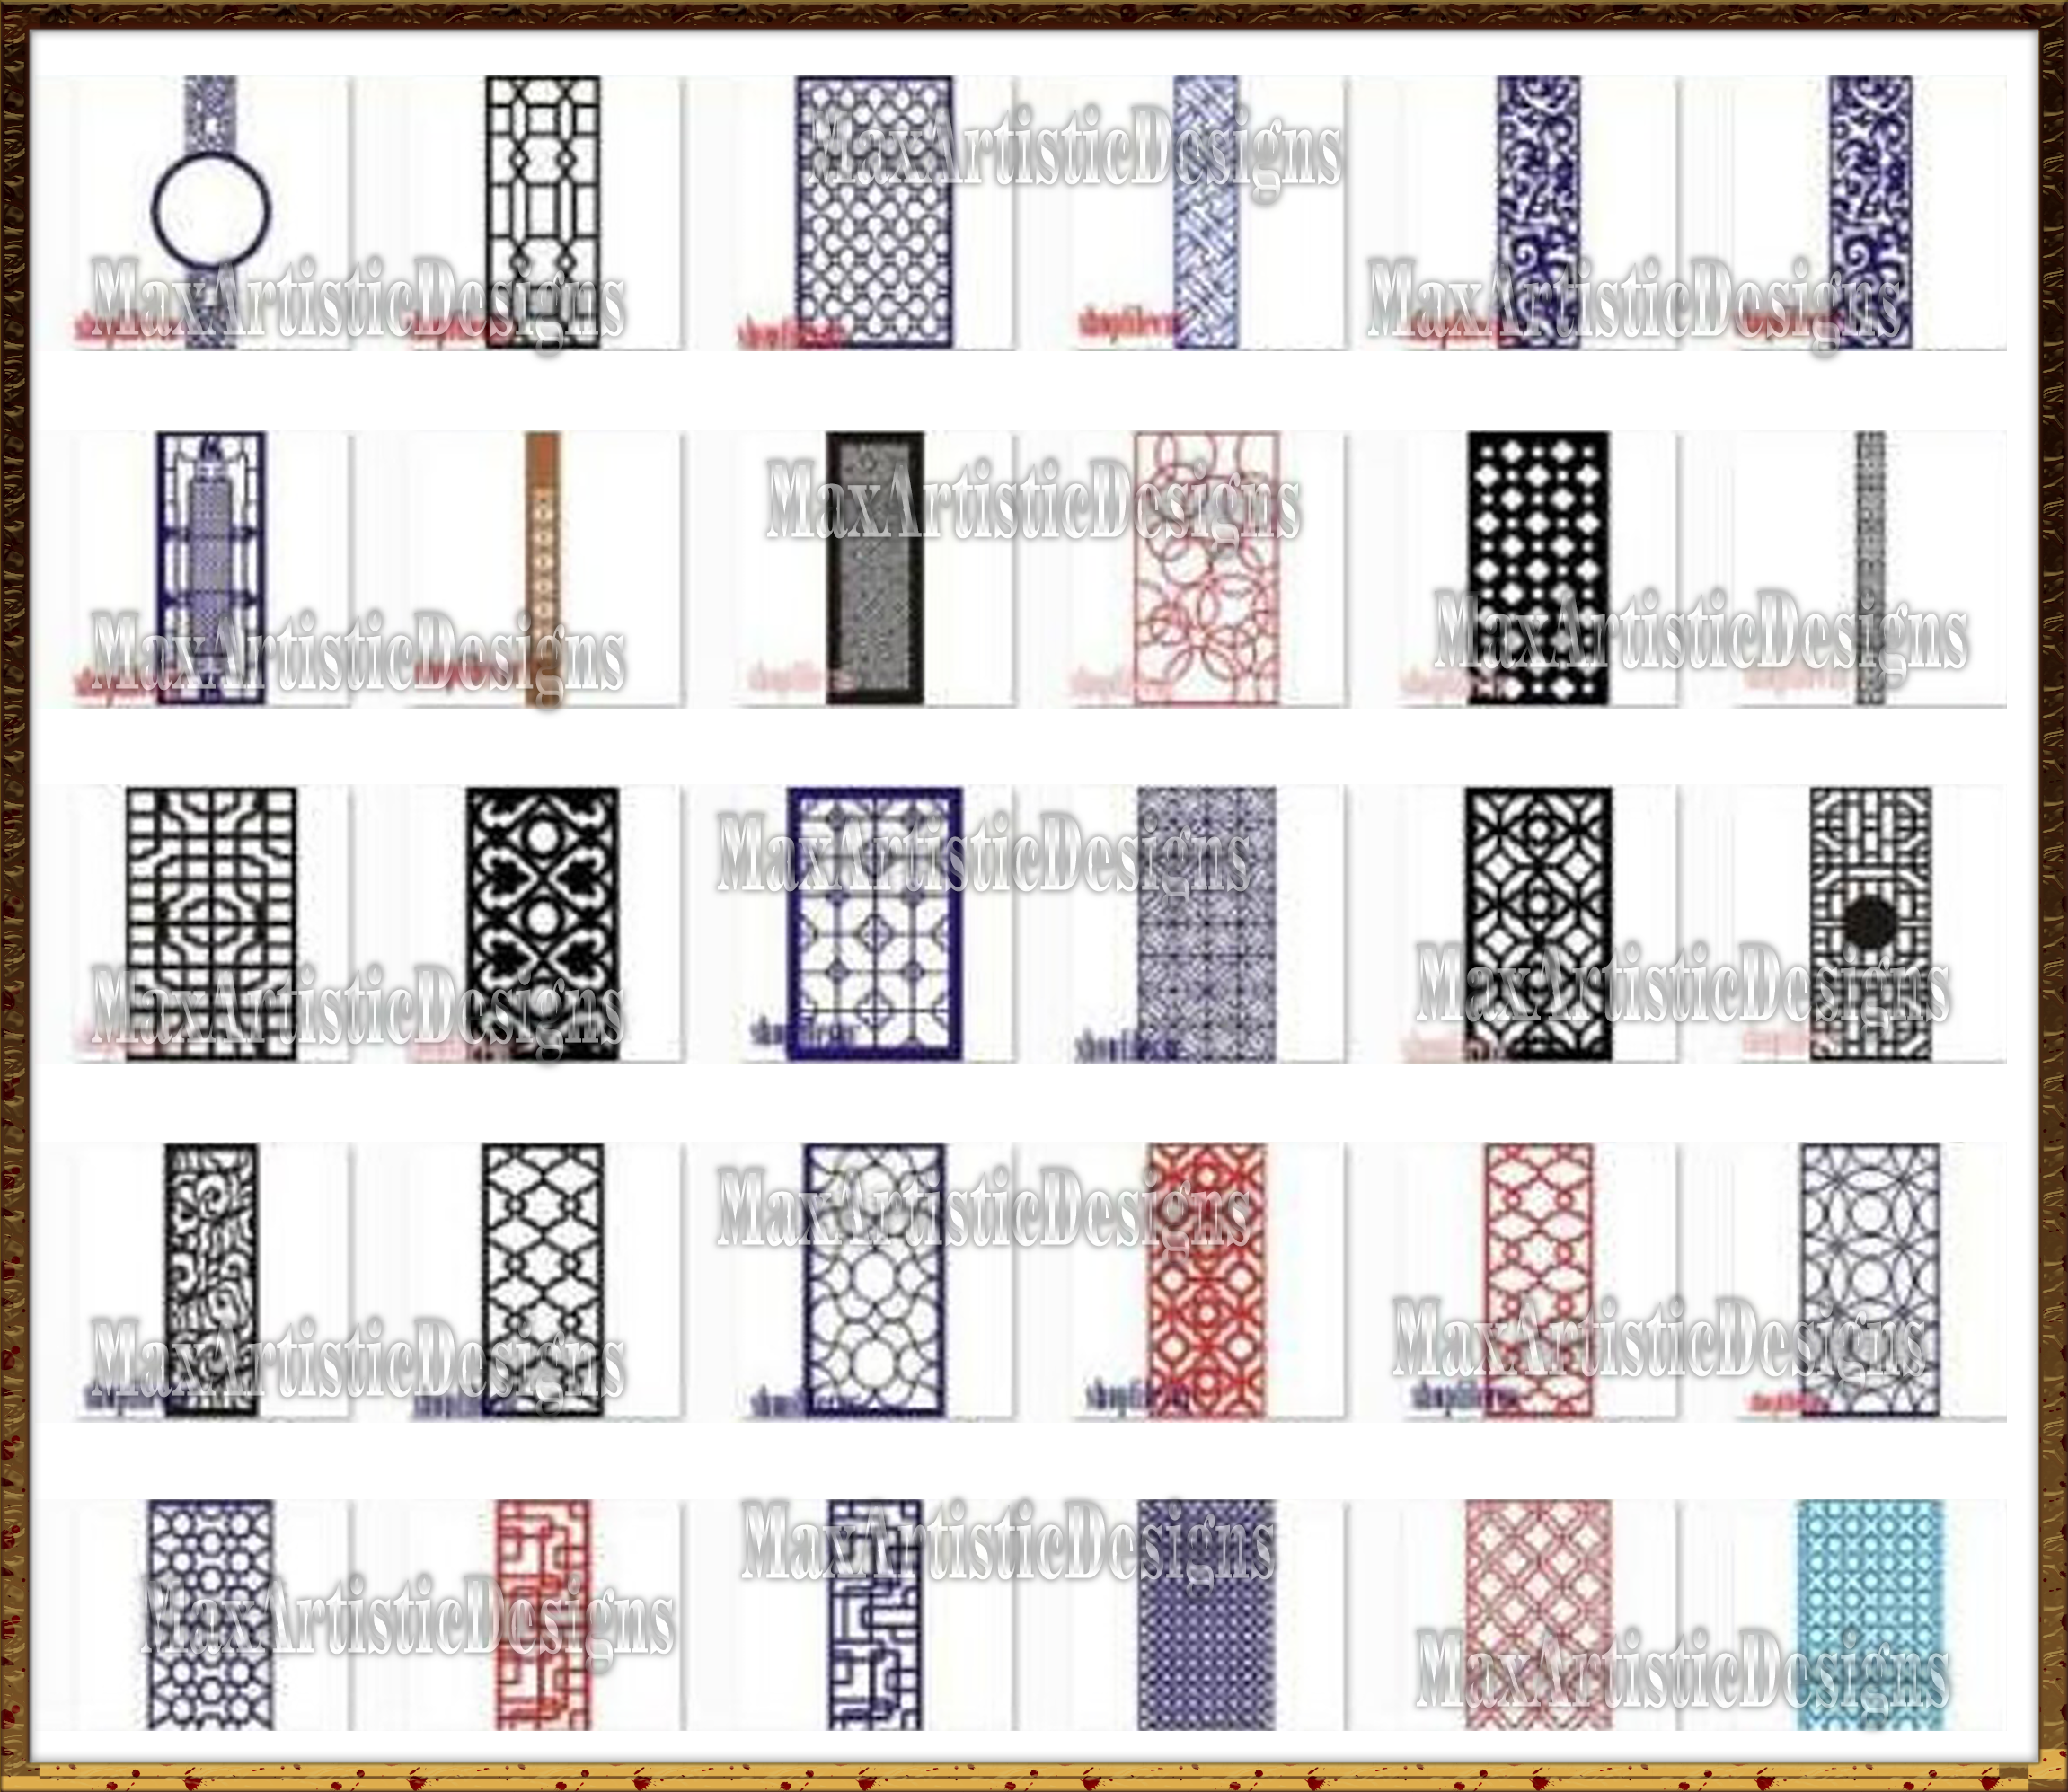 2000 dxf cdr deco panels files many frames for cnc plasma laser cut, cnc vector, ready to cut download